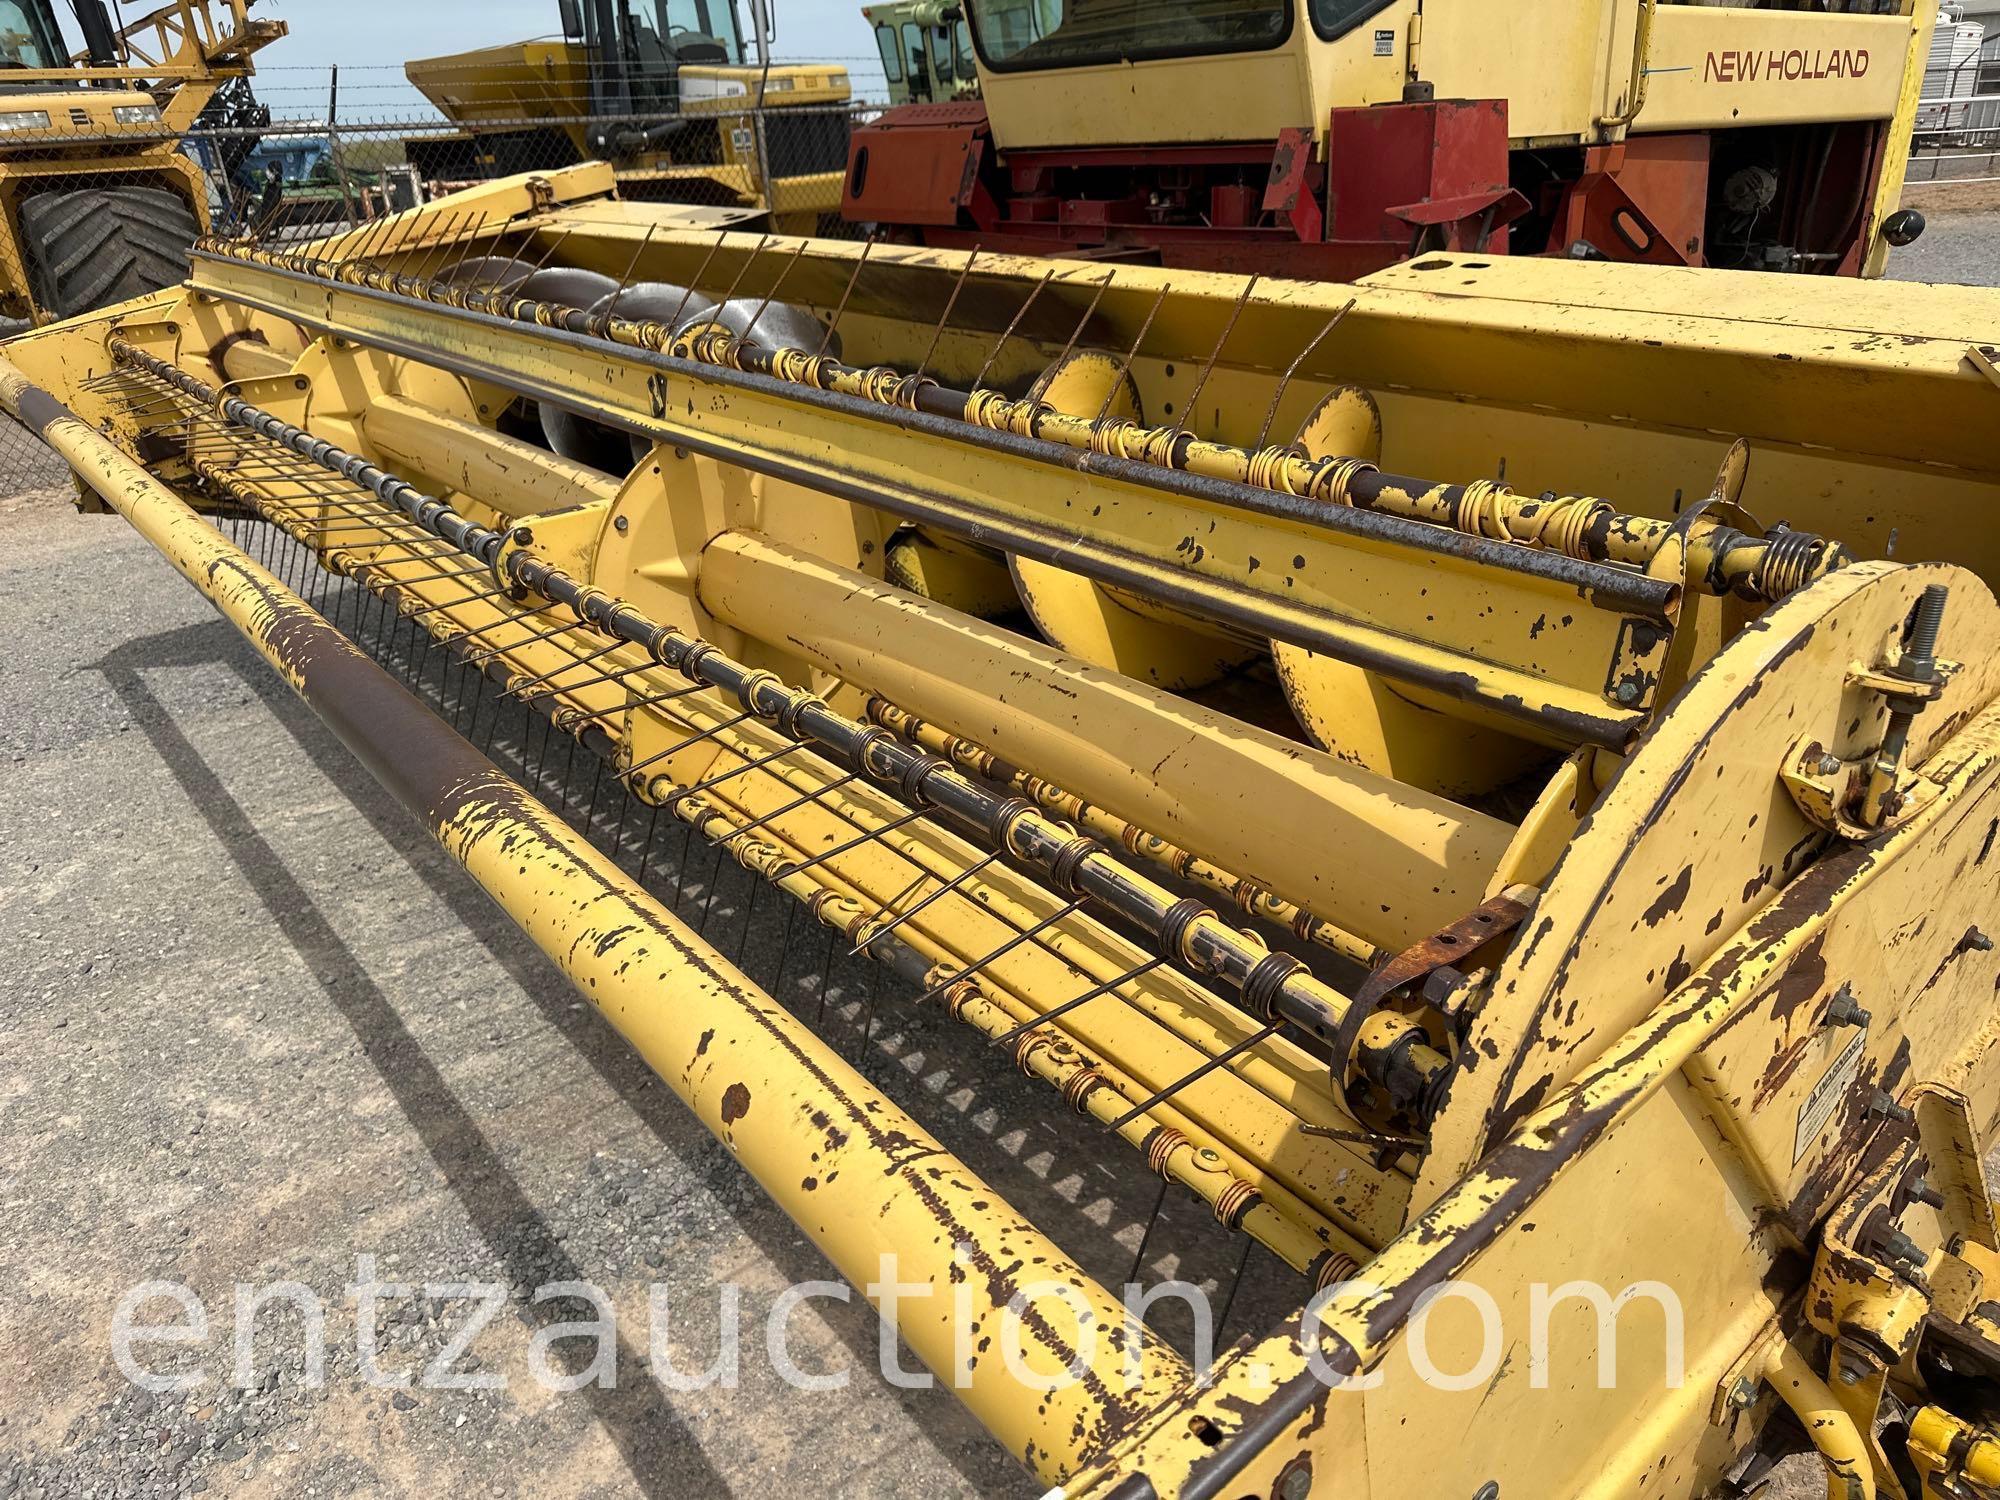 1982 NEW HOLLAND 1116 SELF-PROPELLED SWATHER, 16'